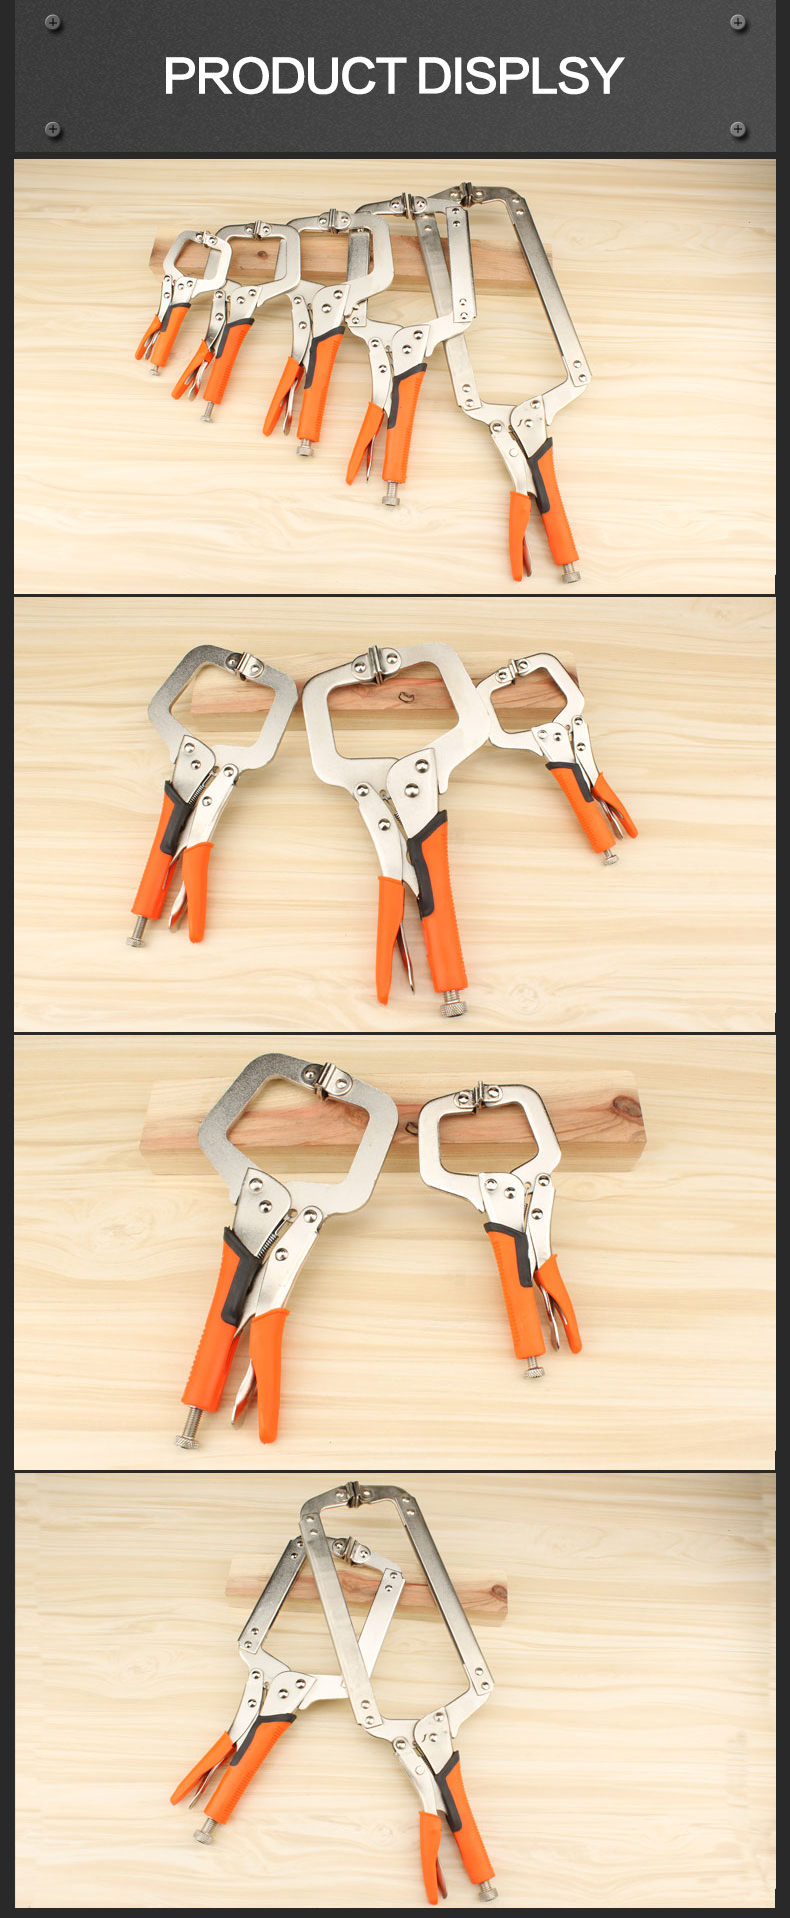 MYTEC-MC-010102-C-Type-D-type-Crimping-Pliers-Square-Mouth-Rubber-Handle-Wood-Working-Fast-Pliers-1193190-4